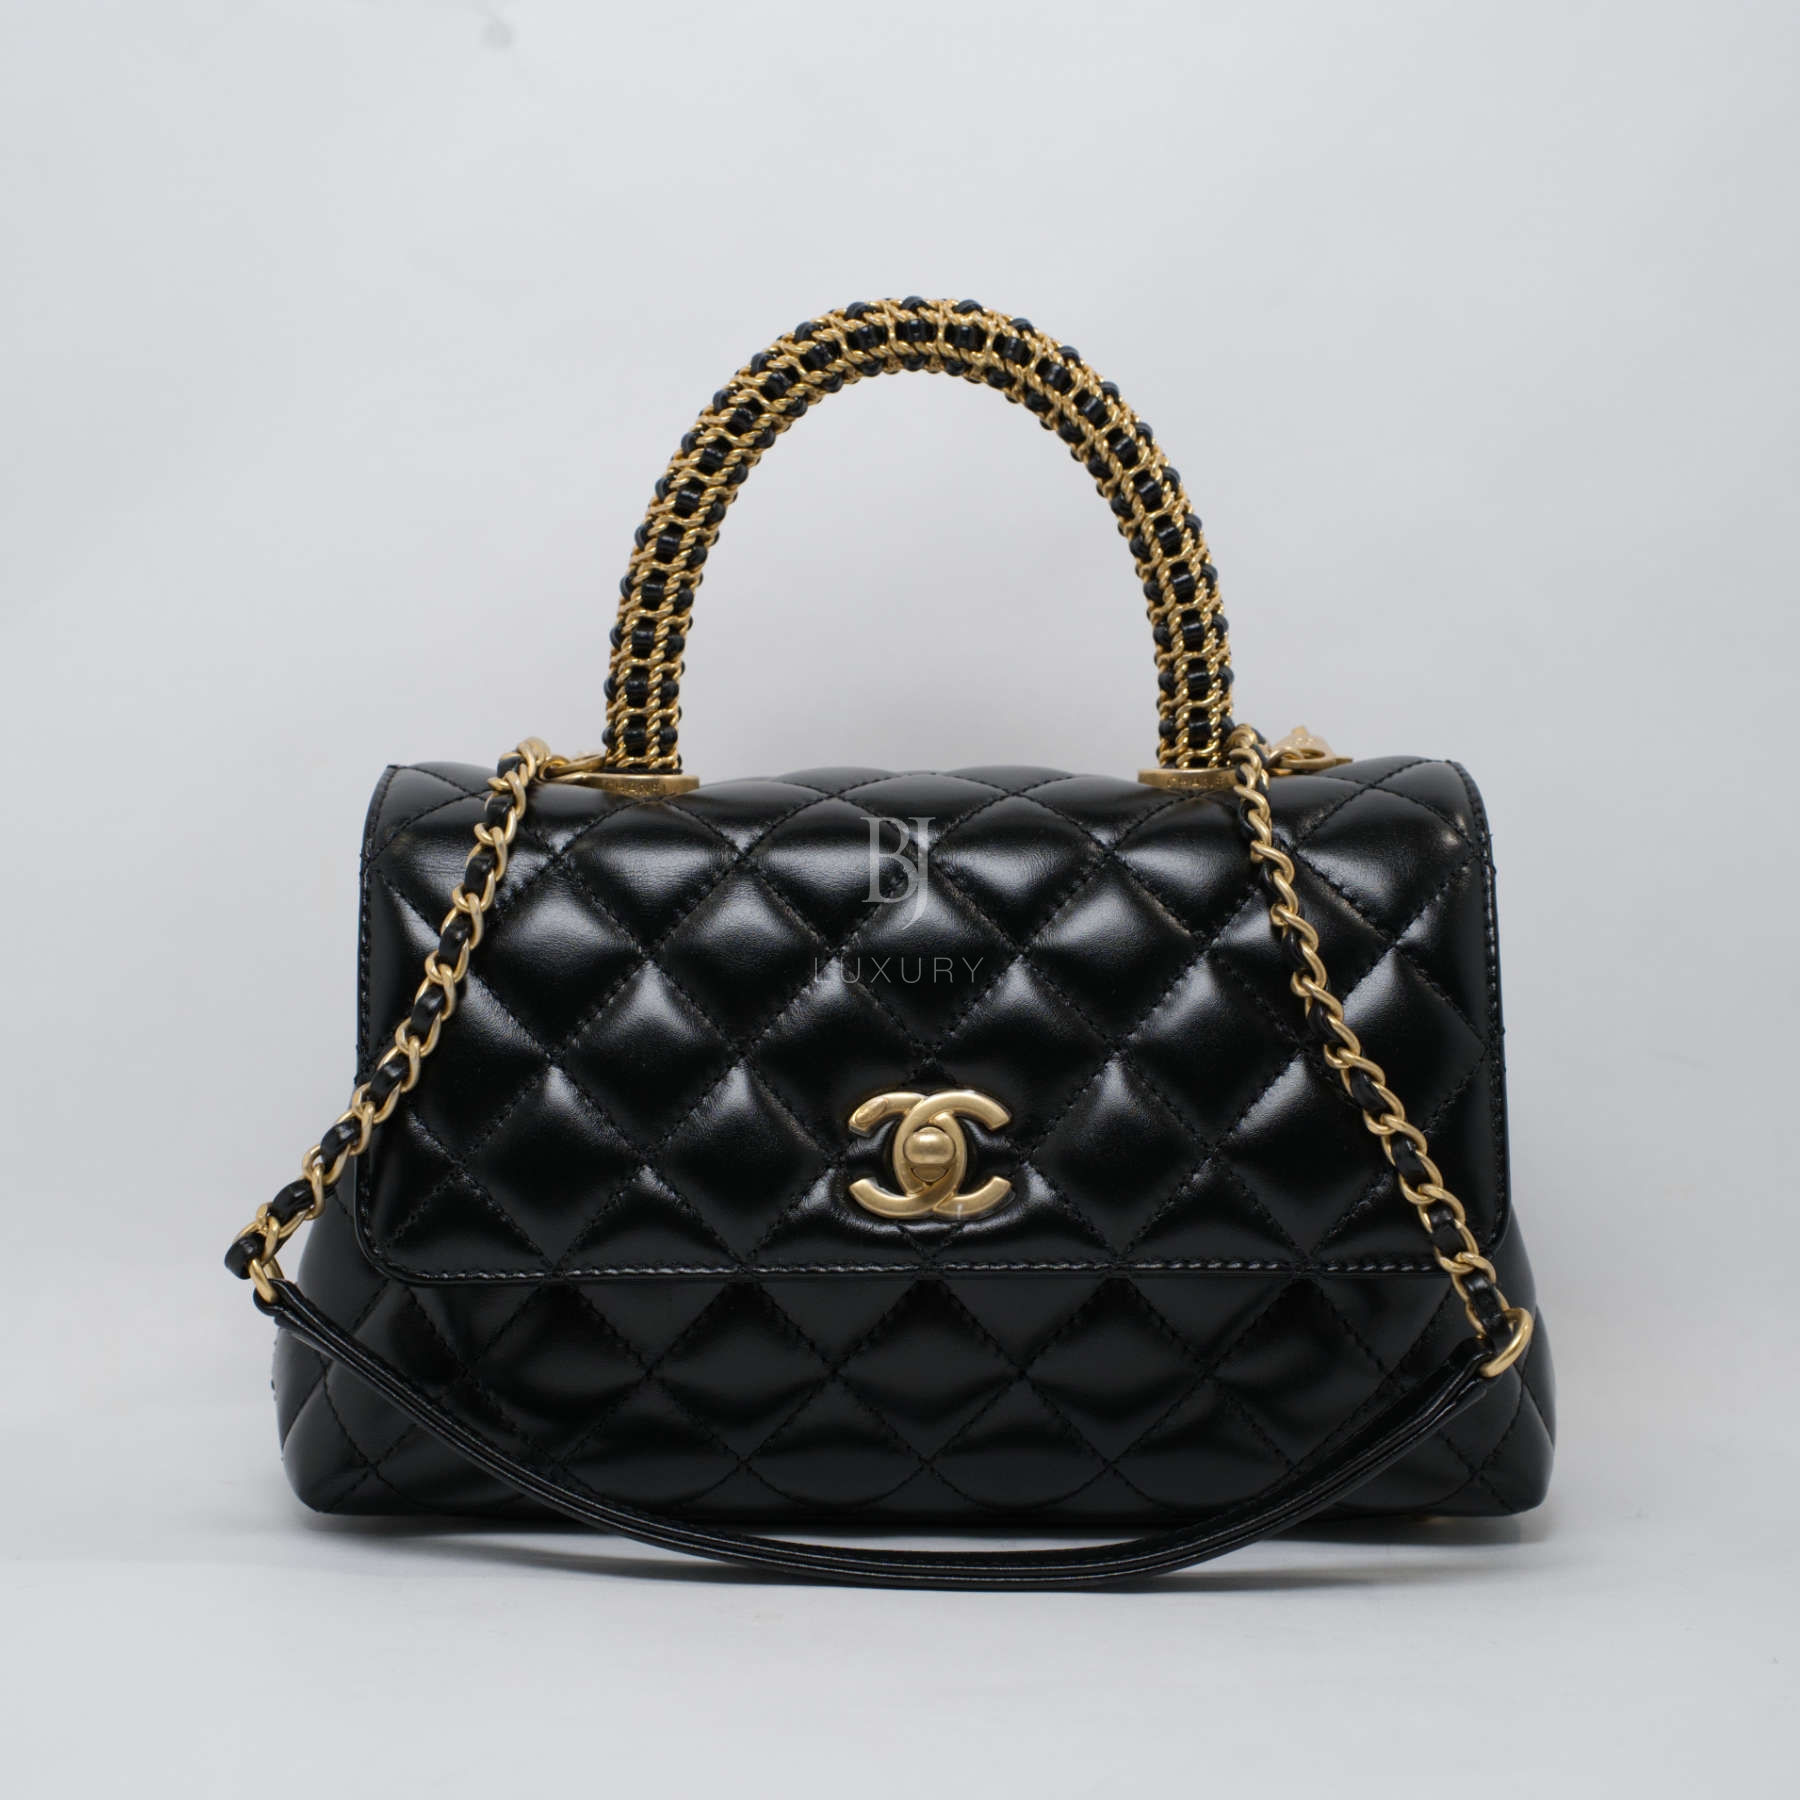 CHANEL-COCOHANDLE-SMALL-BLACK-LAMBSKIN-4134 front with strap.jpg